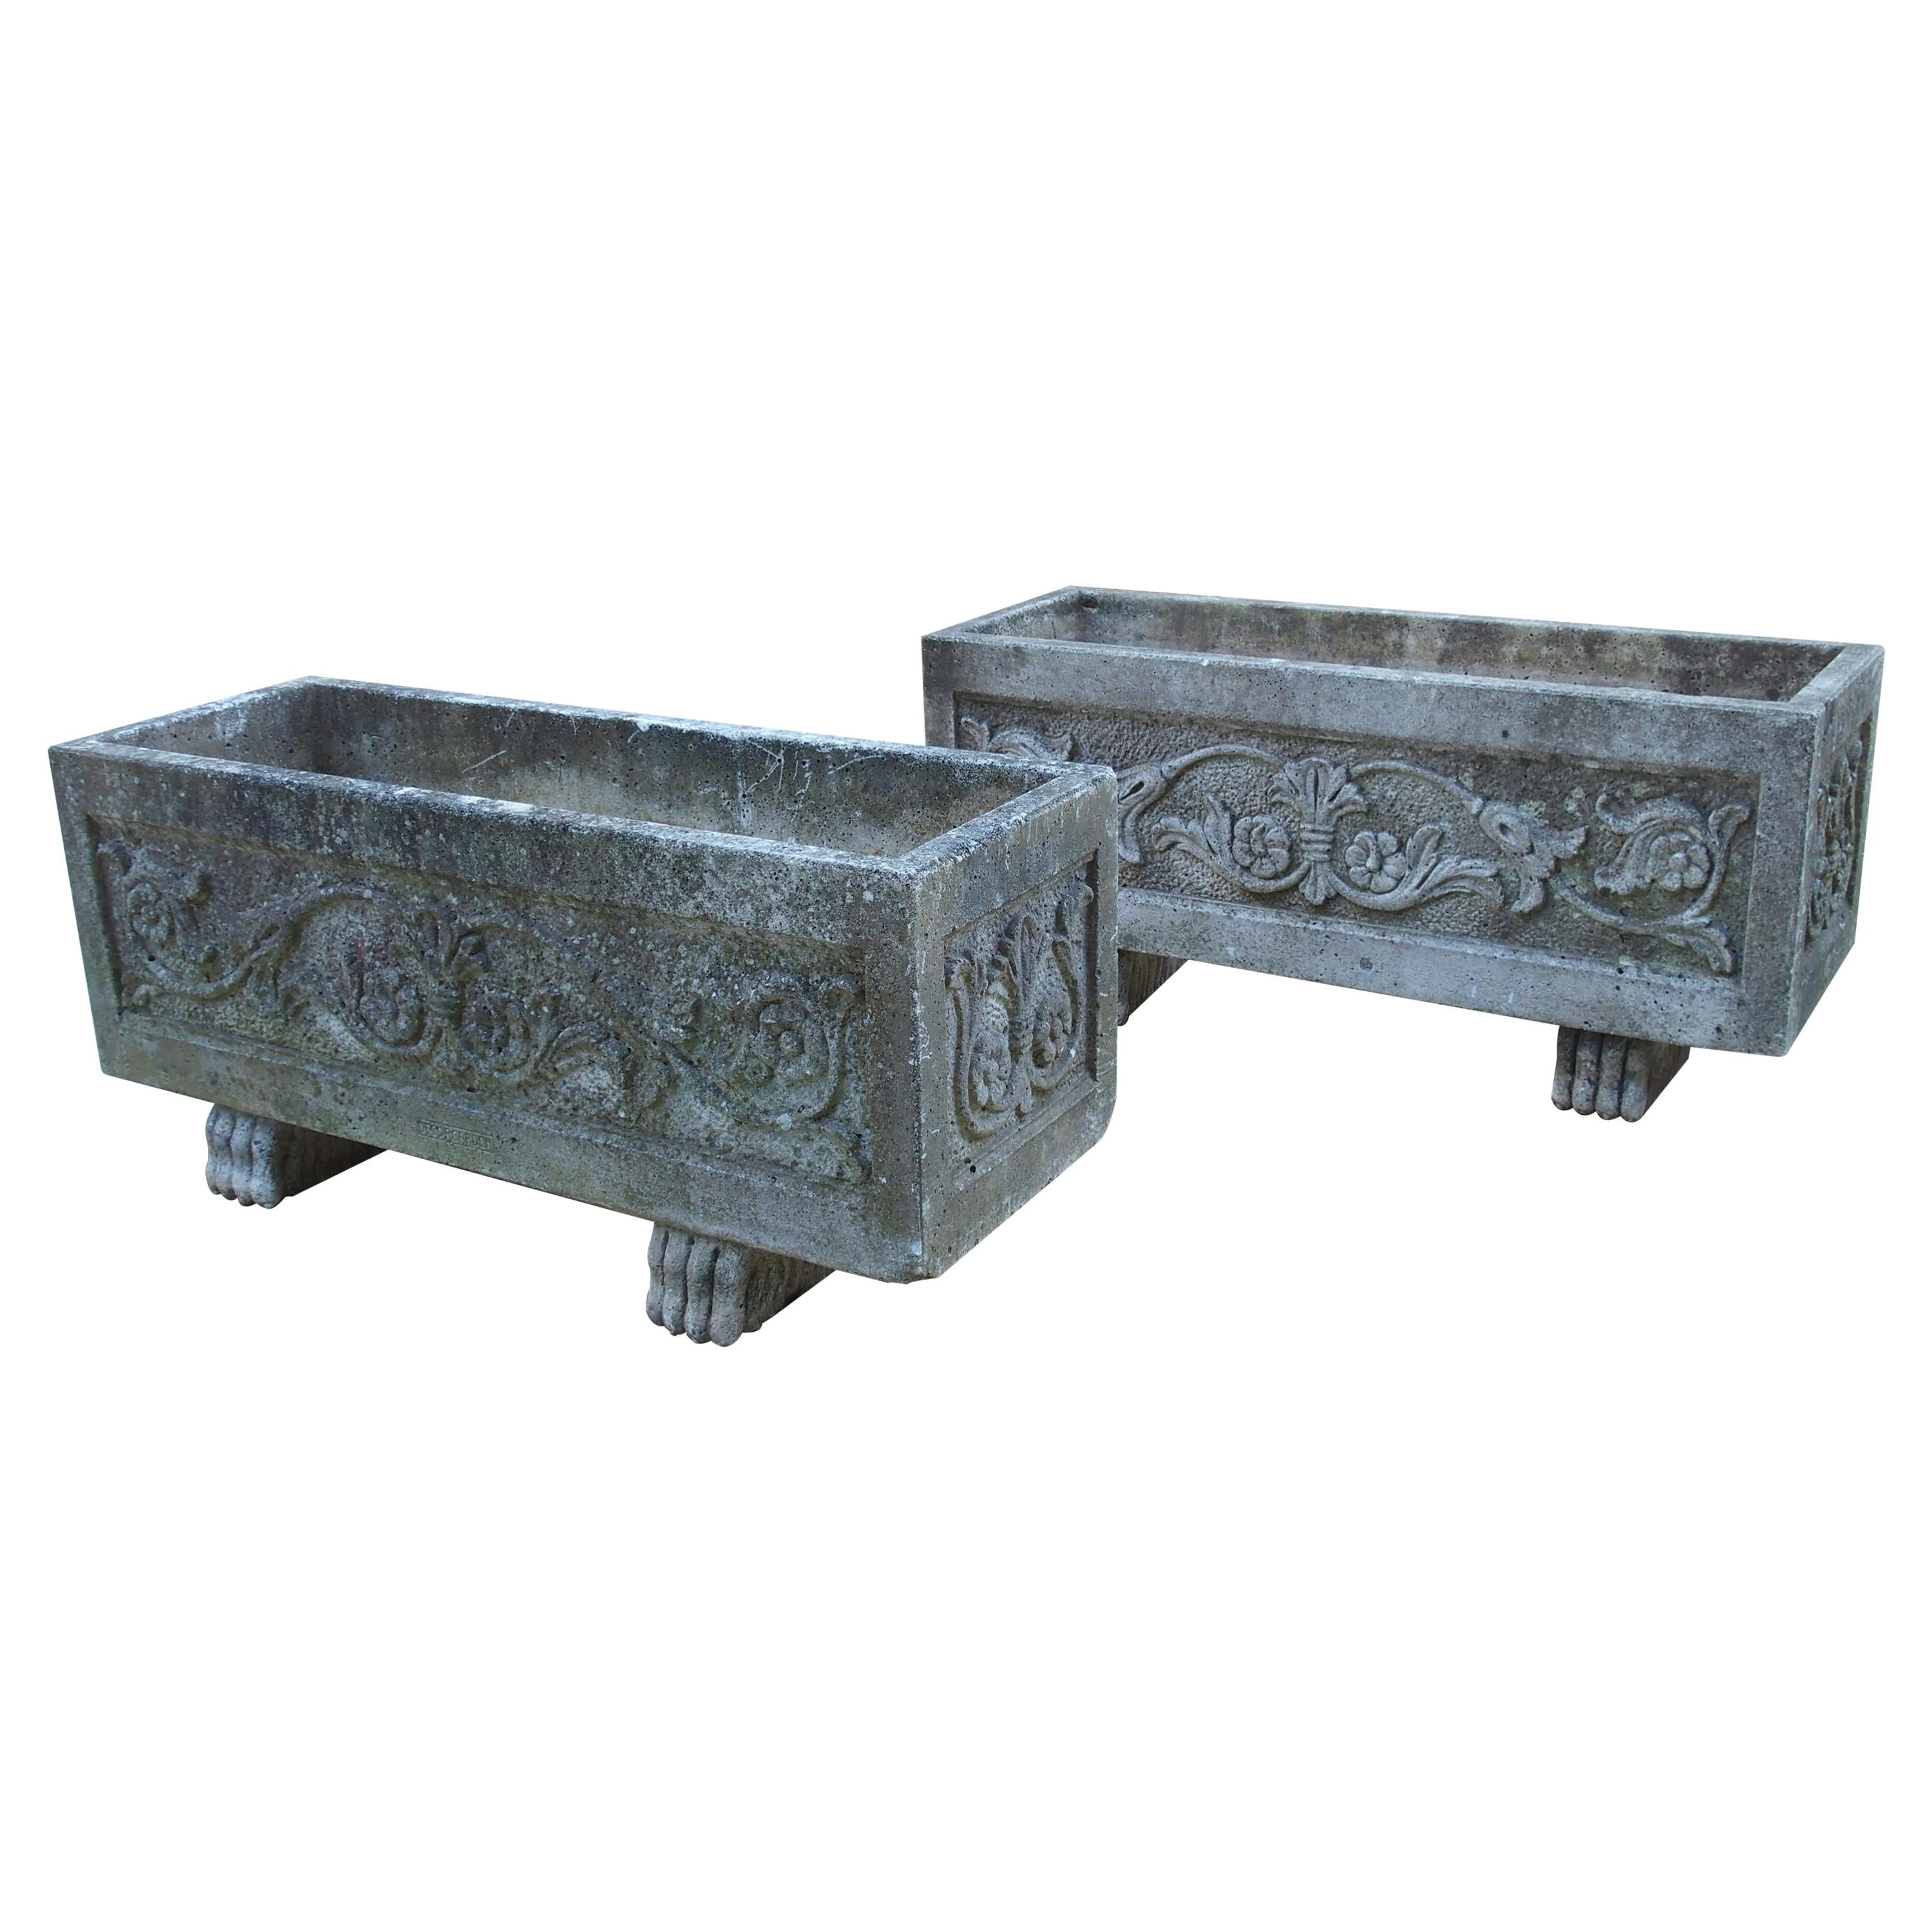 Pair of Decorative Cast Garden Planters from France